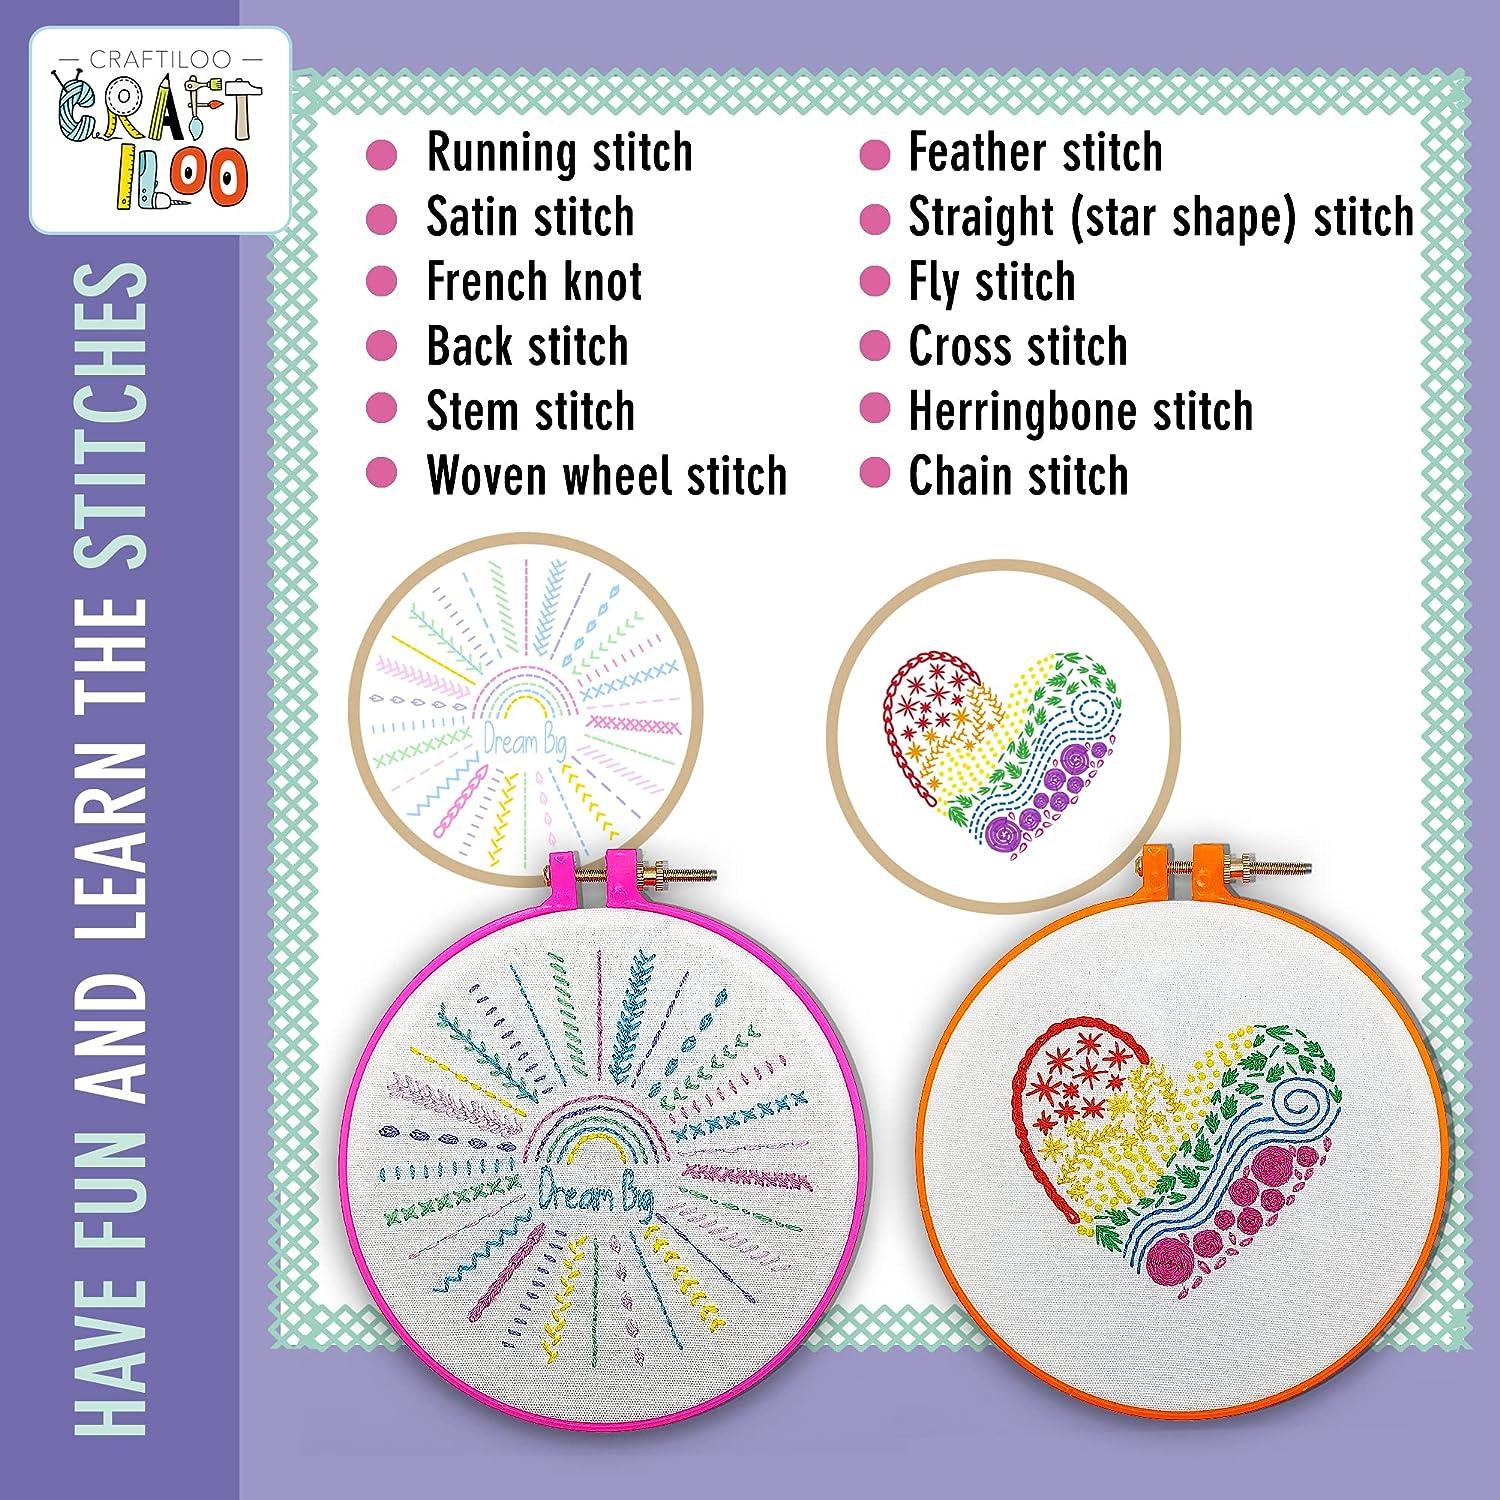 CRAFTILOO 10 Pre-Stamped Embroidery Patterns for Beginners